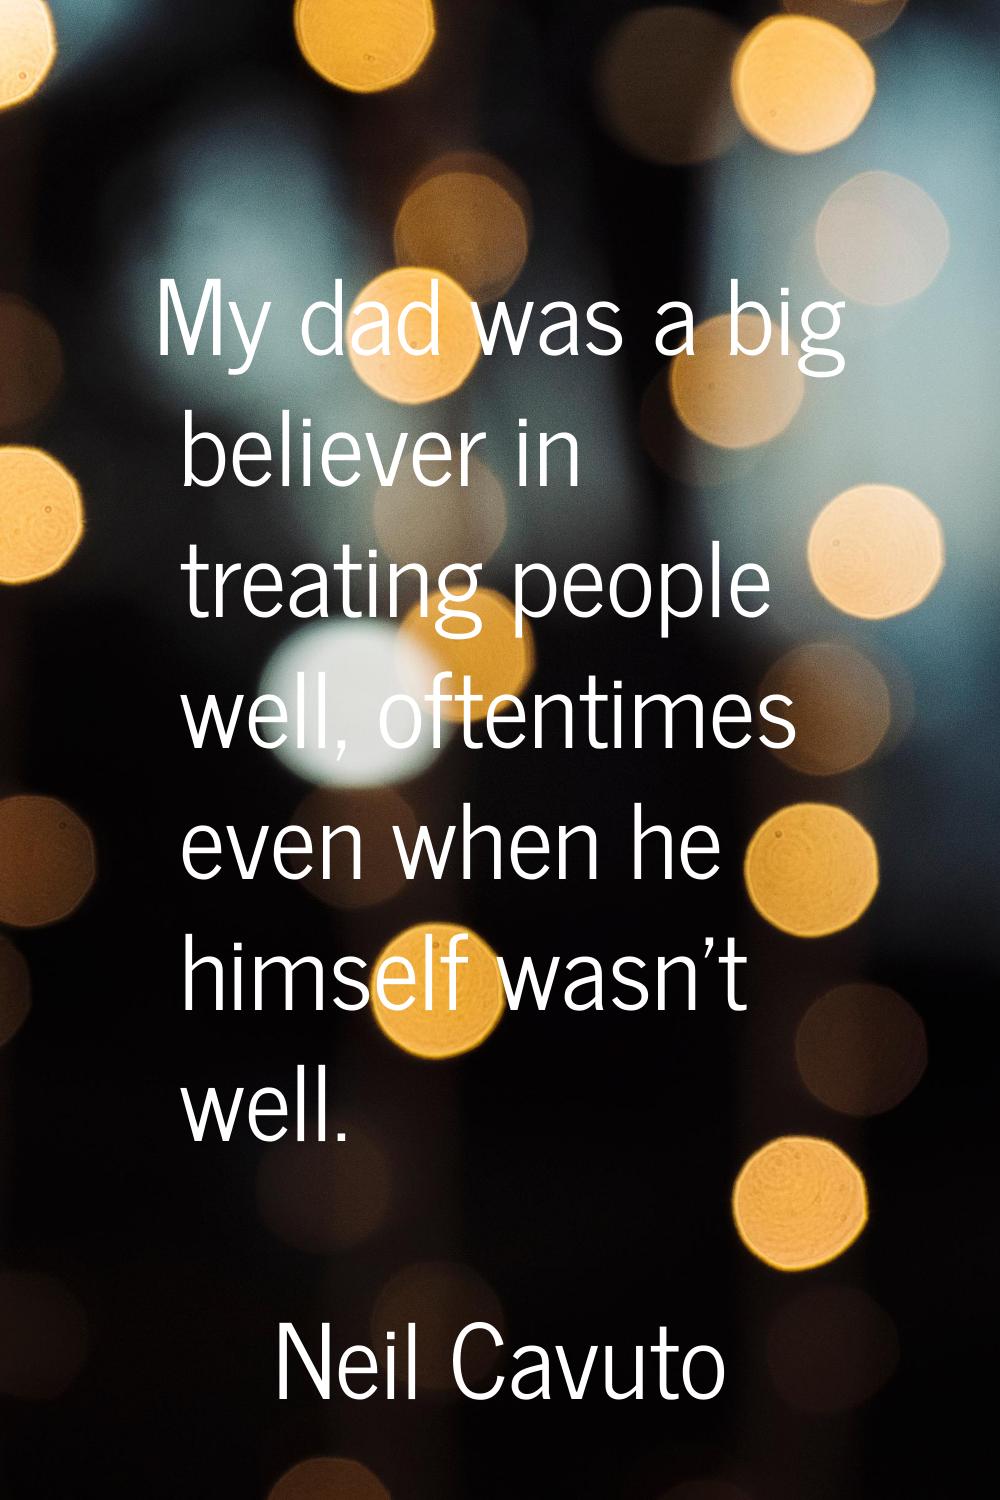 My dad was a big believer in treating people well, oftentimes even when he himself wasn't well.